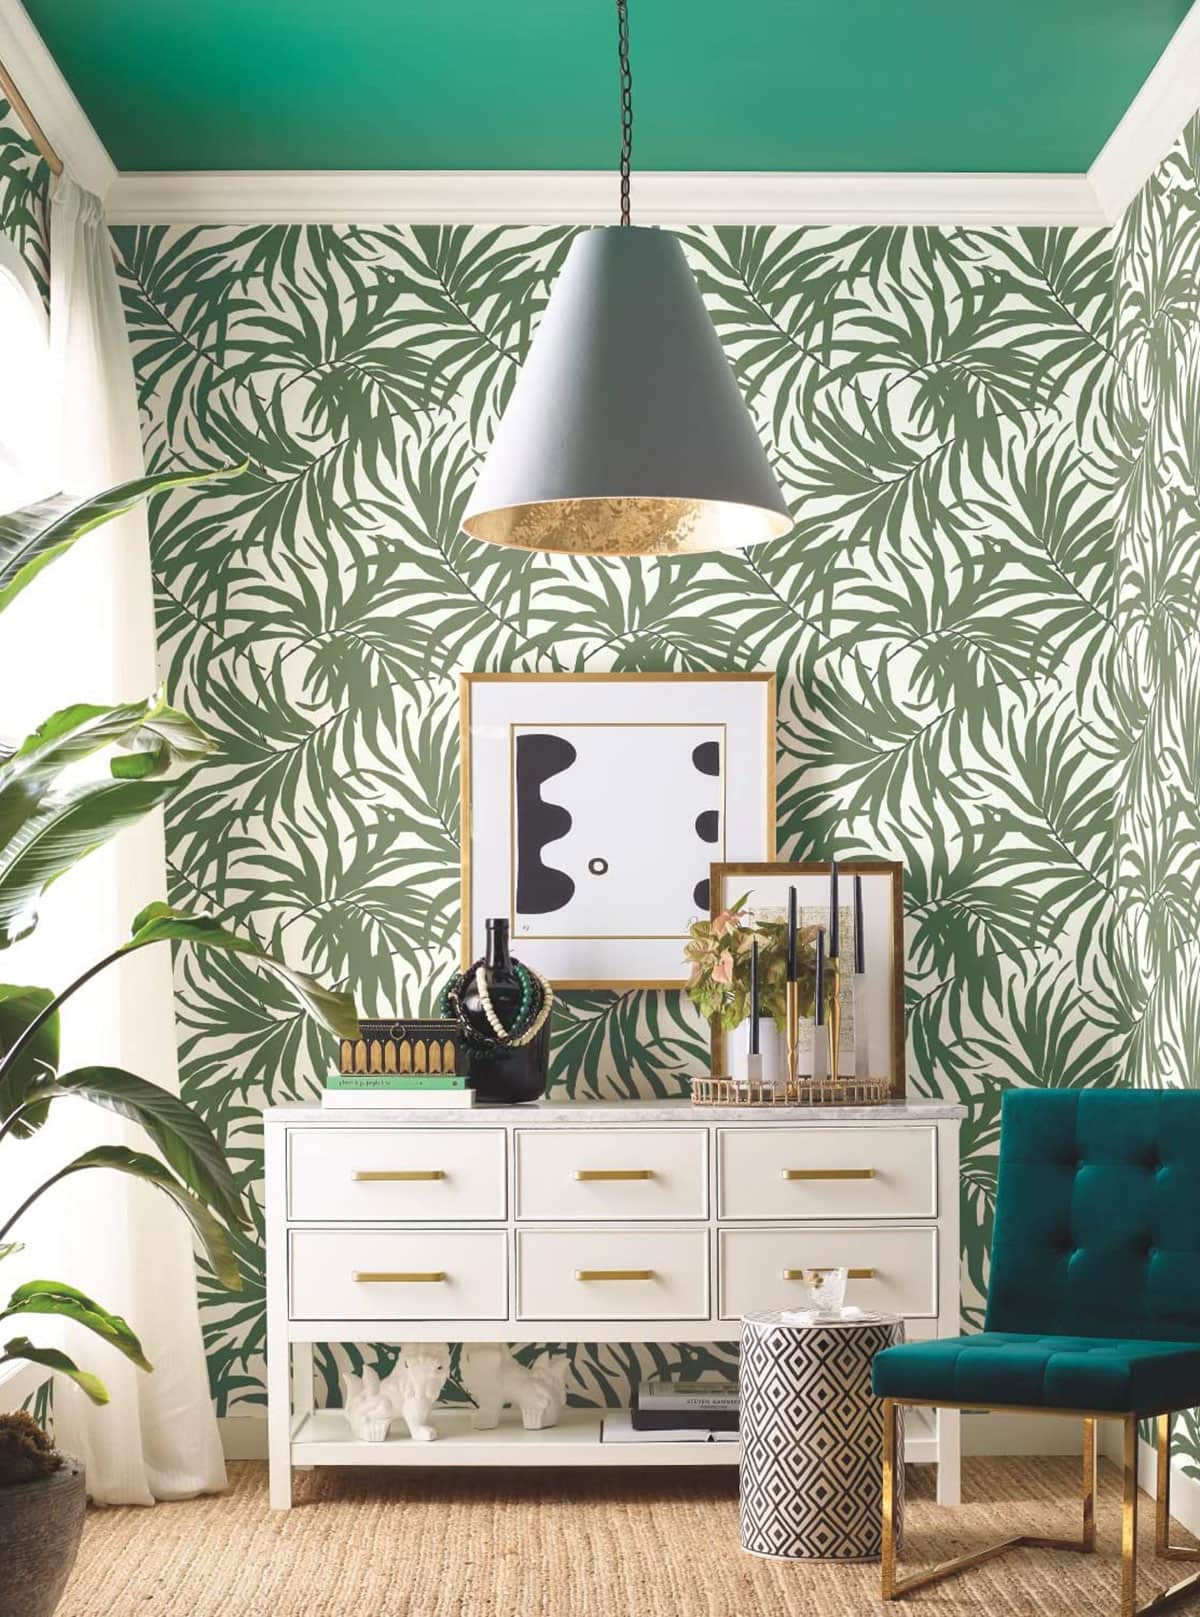 Green Decor - Decorating Ideas For Your Home For Spring - Green accent wall - make a statement with this green wallpaper